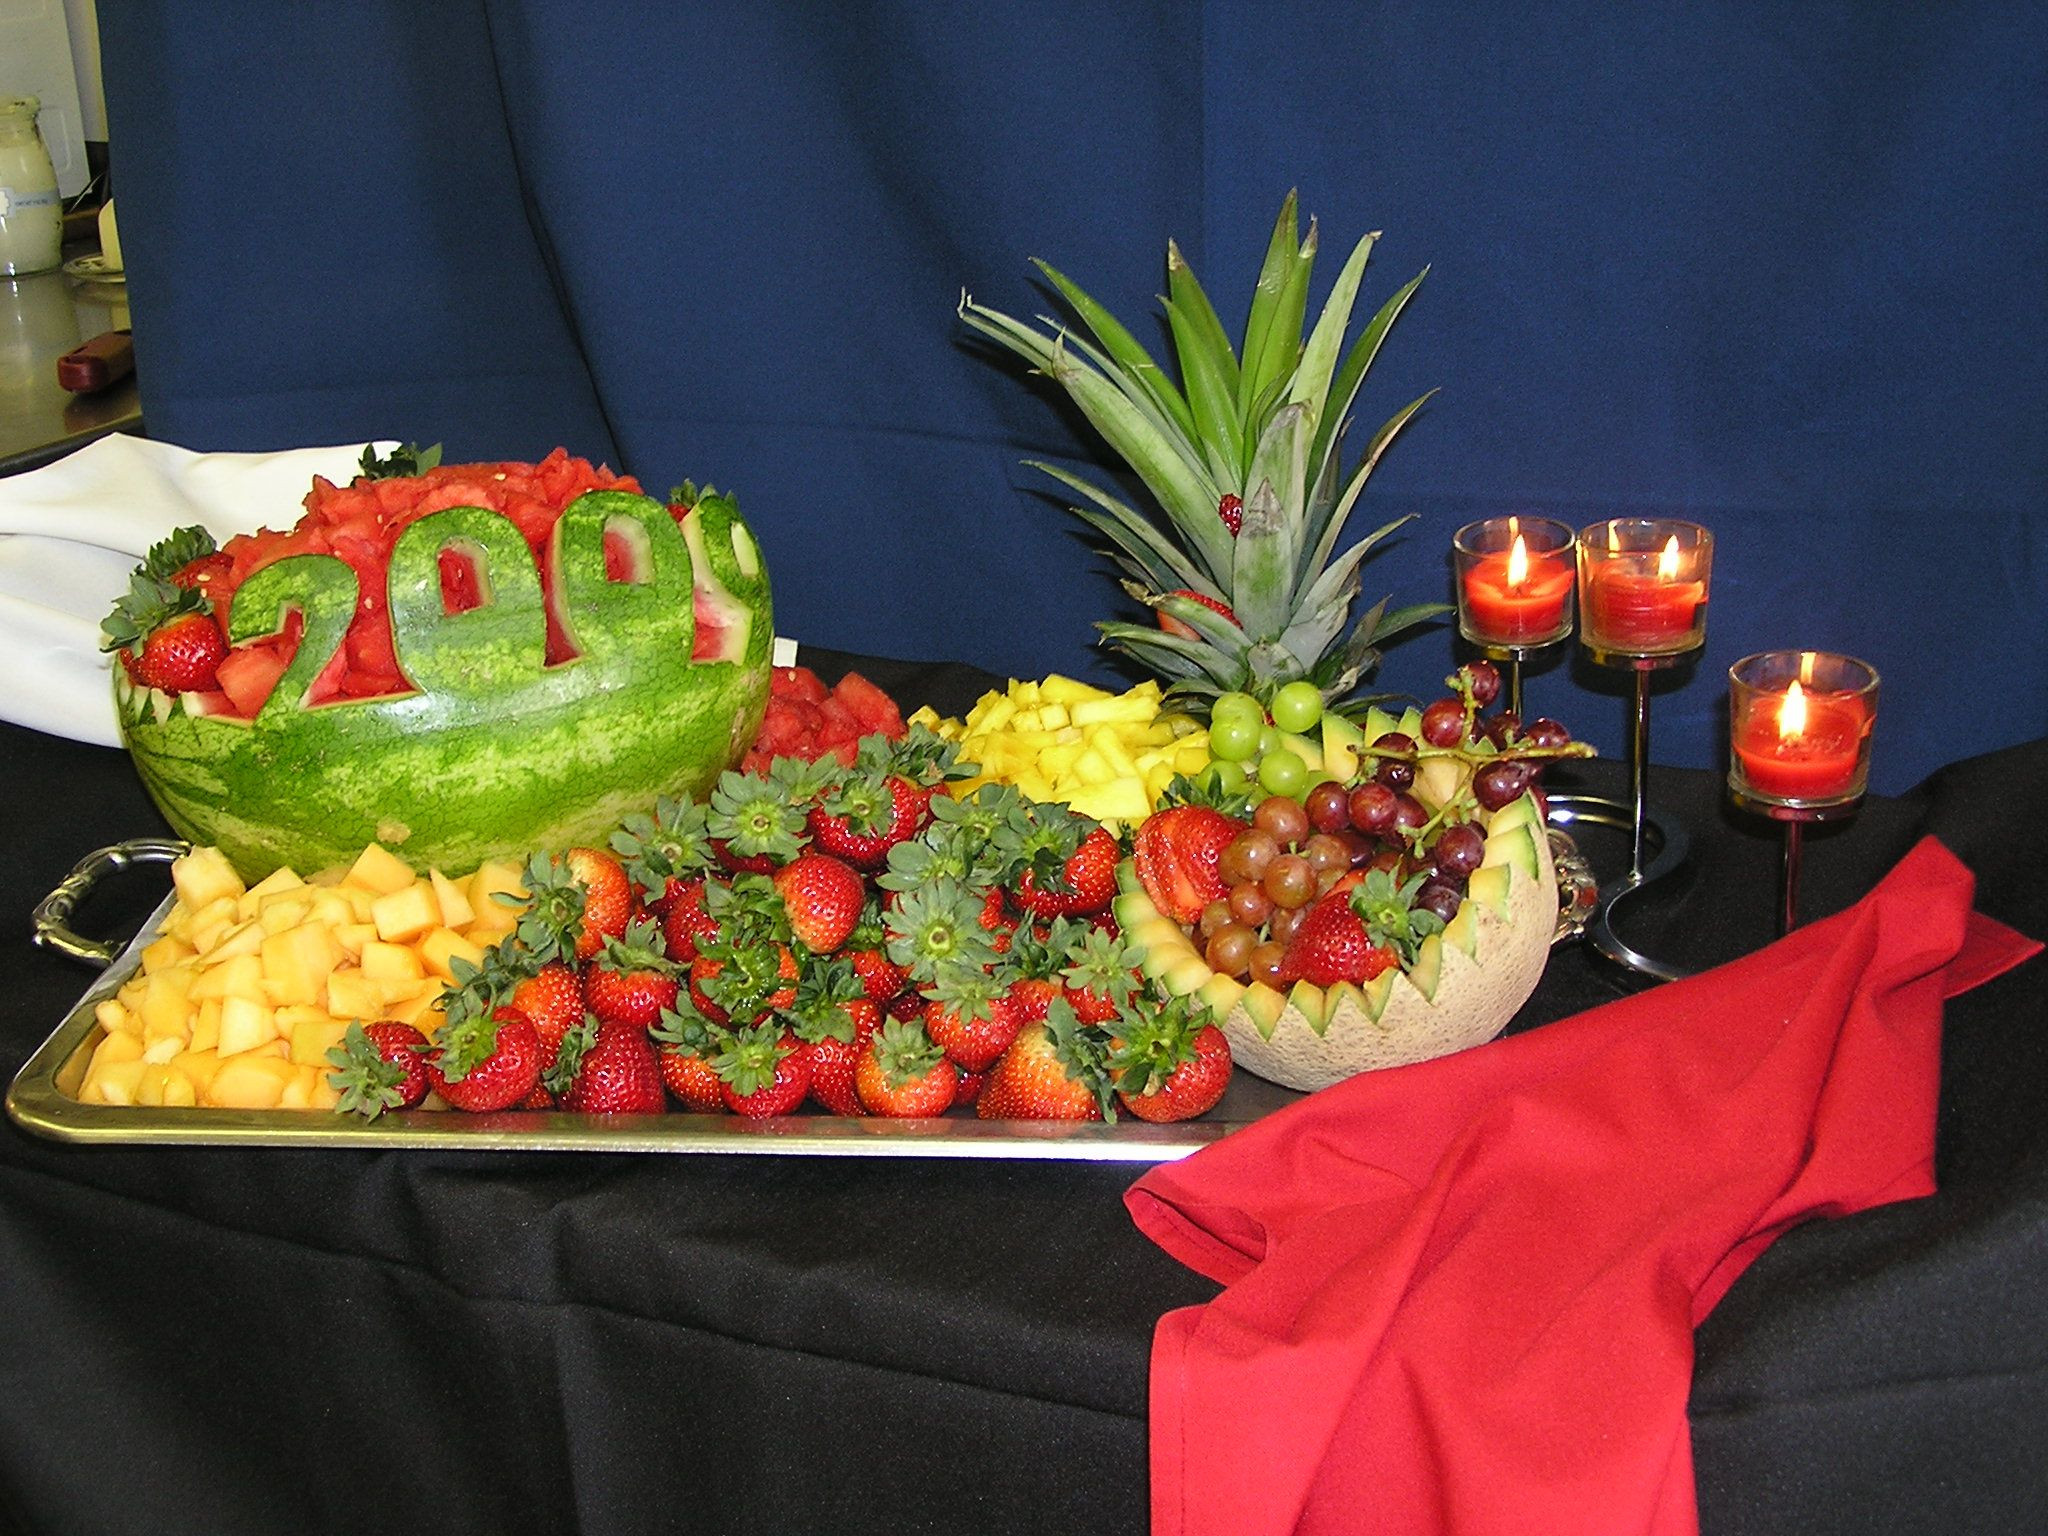 Cheap Catering Ideas For Graduation Party
 Carve a watermelon with the year or name of the graduate